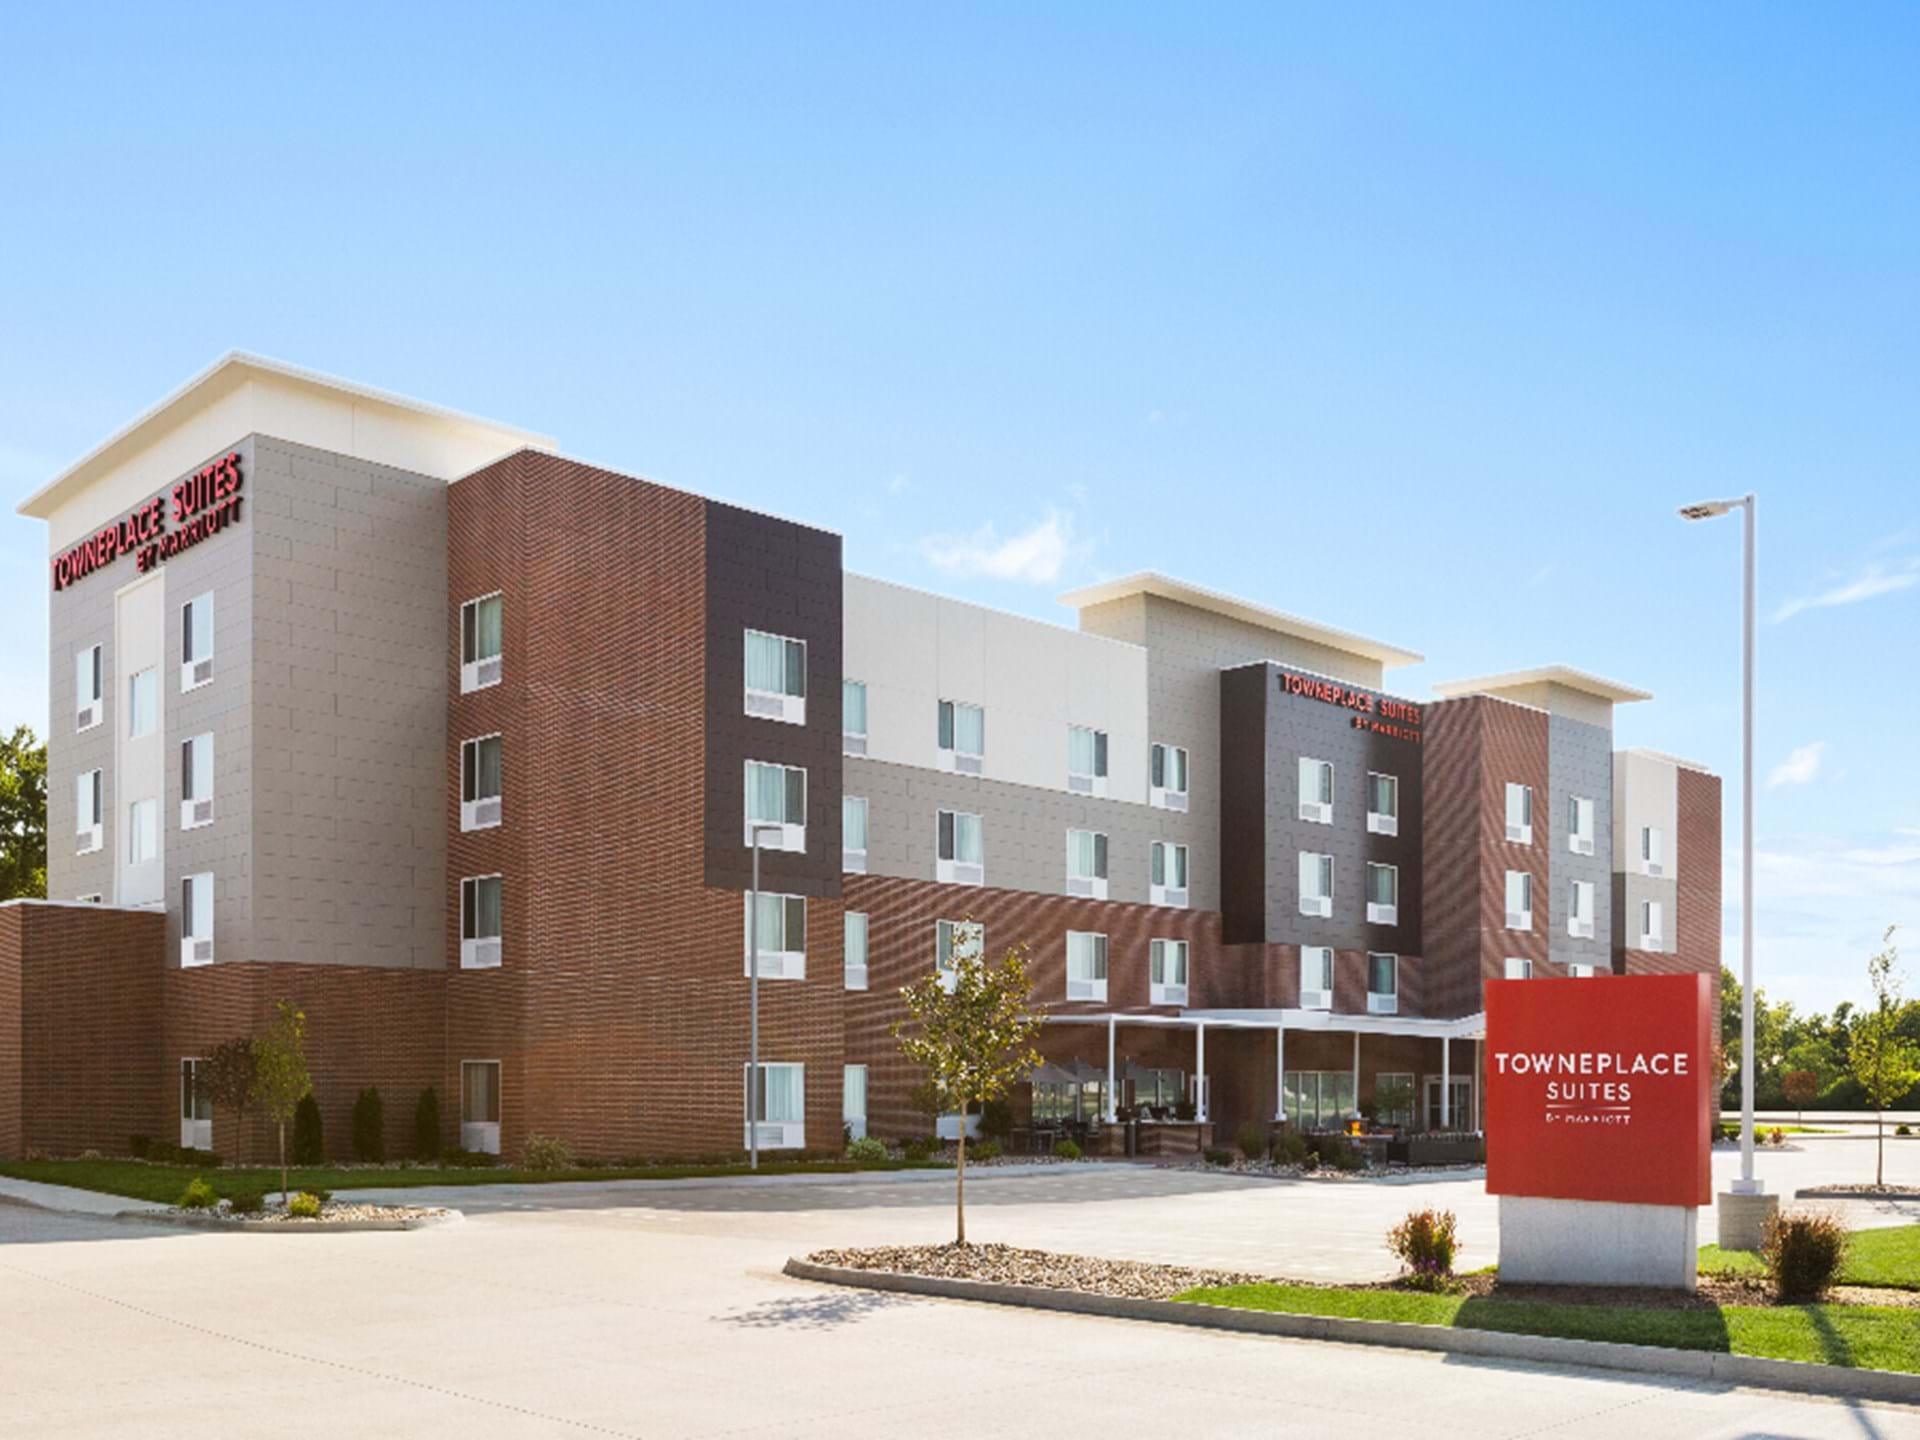 Welcome to the TownePlace Suites by Marriott Cedar Rapids/Marion.